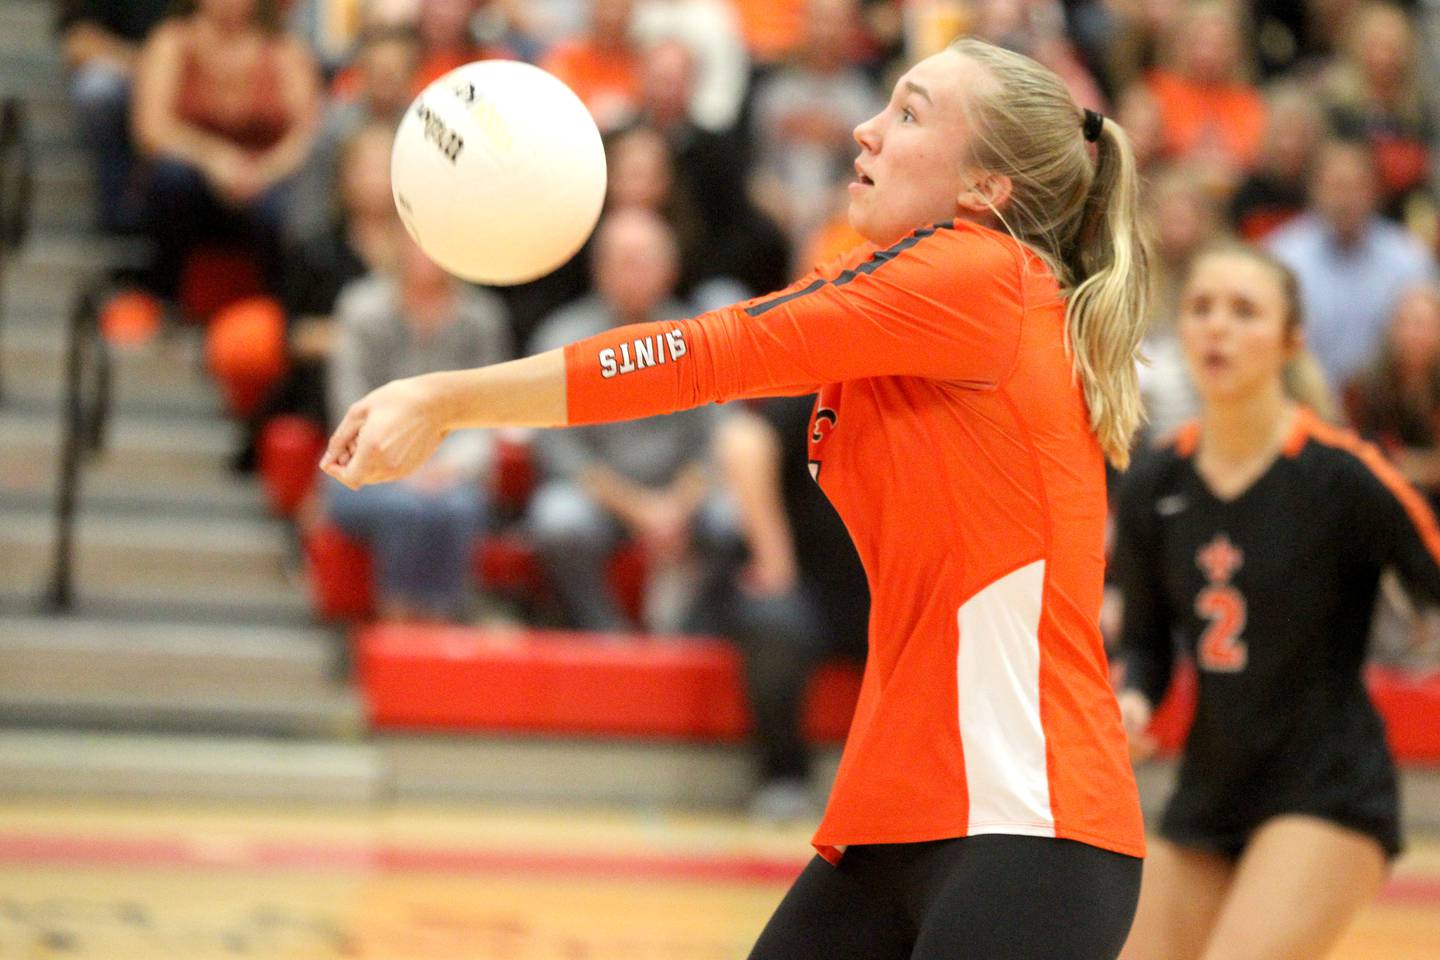 St. Charles East’s Lia Schneider returns the ball during a Class 4A Hinsdale Central supersectional against Loyola Academy on Friday, Nov. 4, 2022. St. Charles East won 25-22, 25-18.